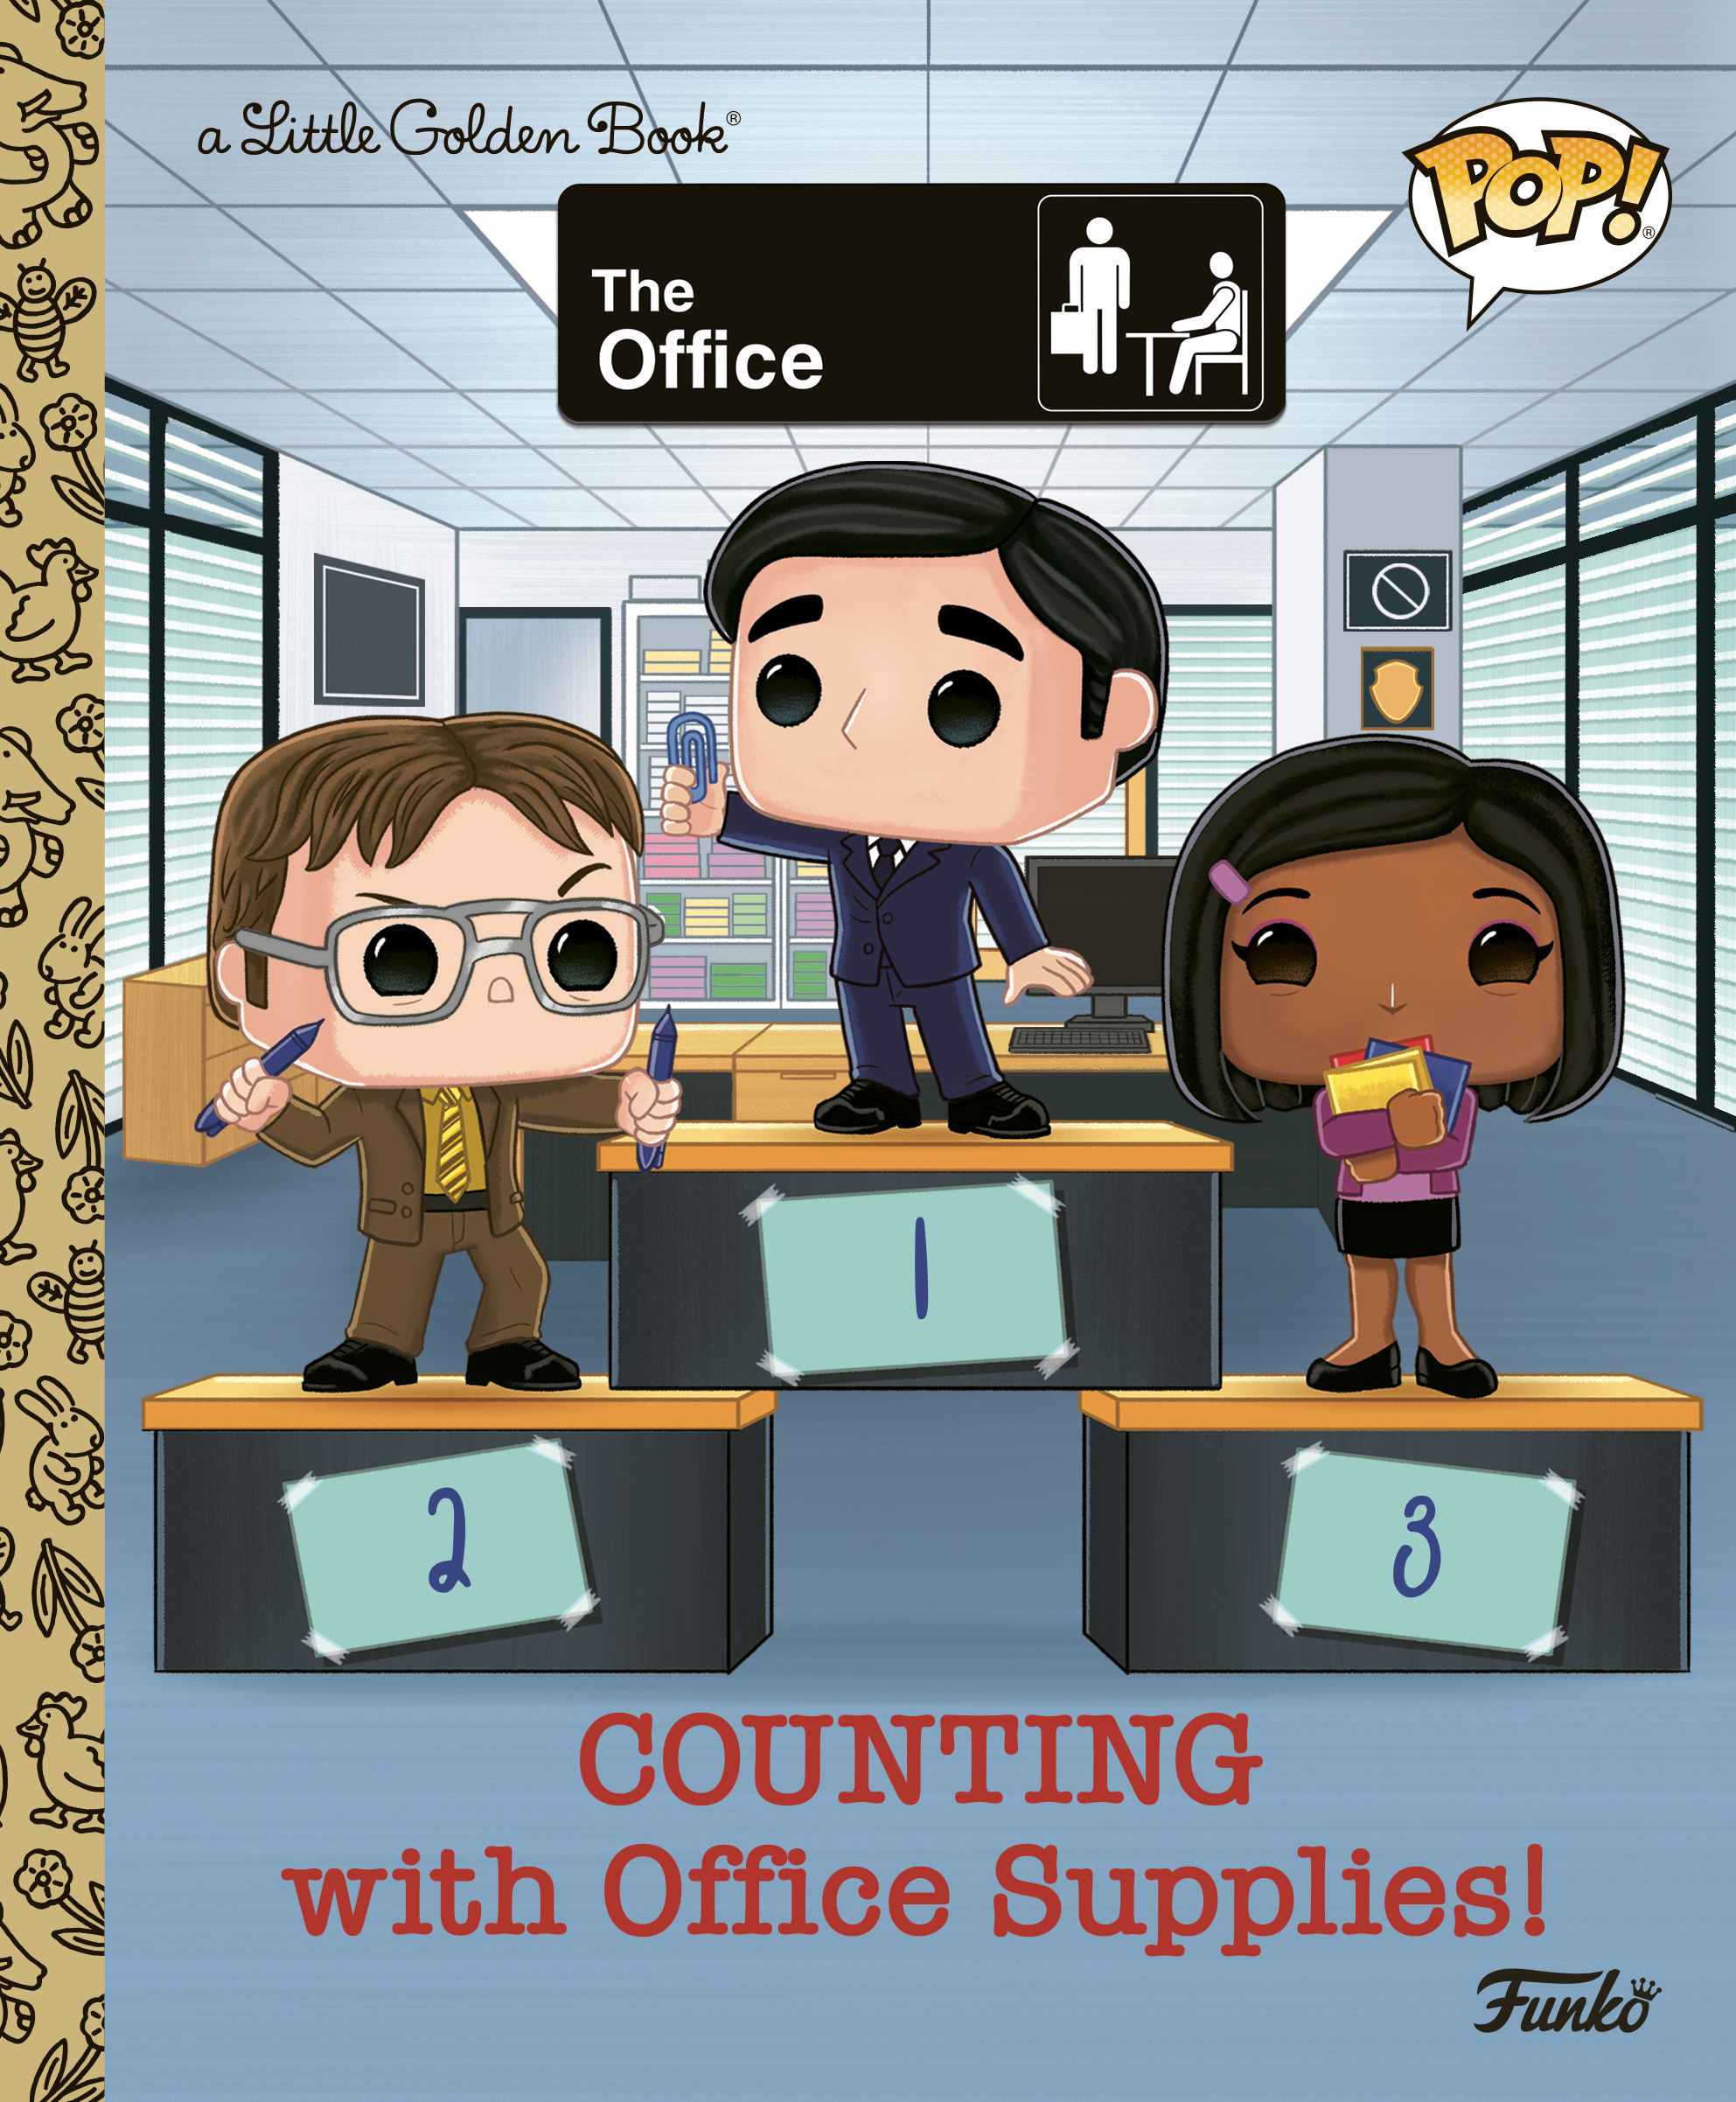 The Office: Counting with Office Supplies! (Funko Pop!) | First reader